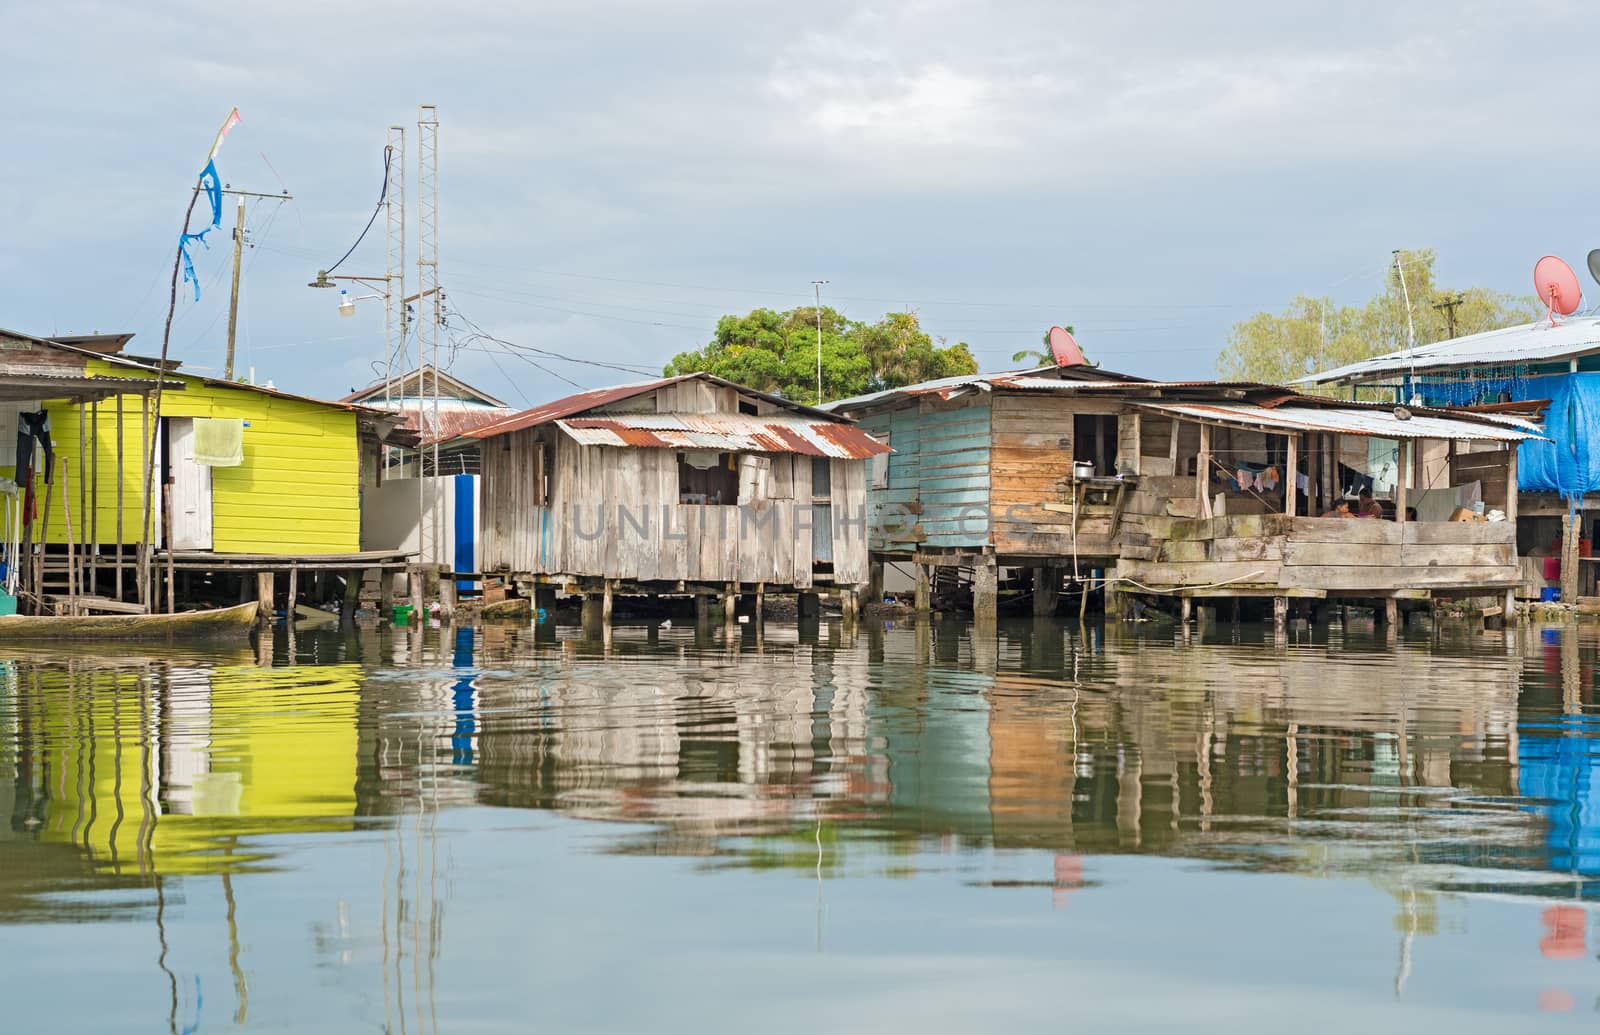  Almirante town in Panama is mainly used as a jumping off point for land travel to other cities on the mainland from Bocas del Toro